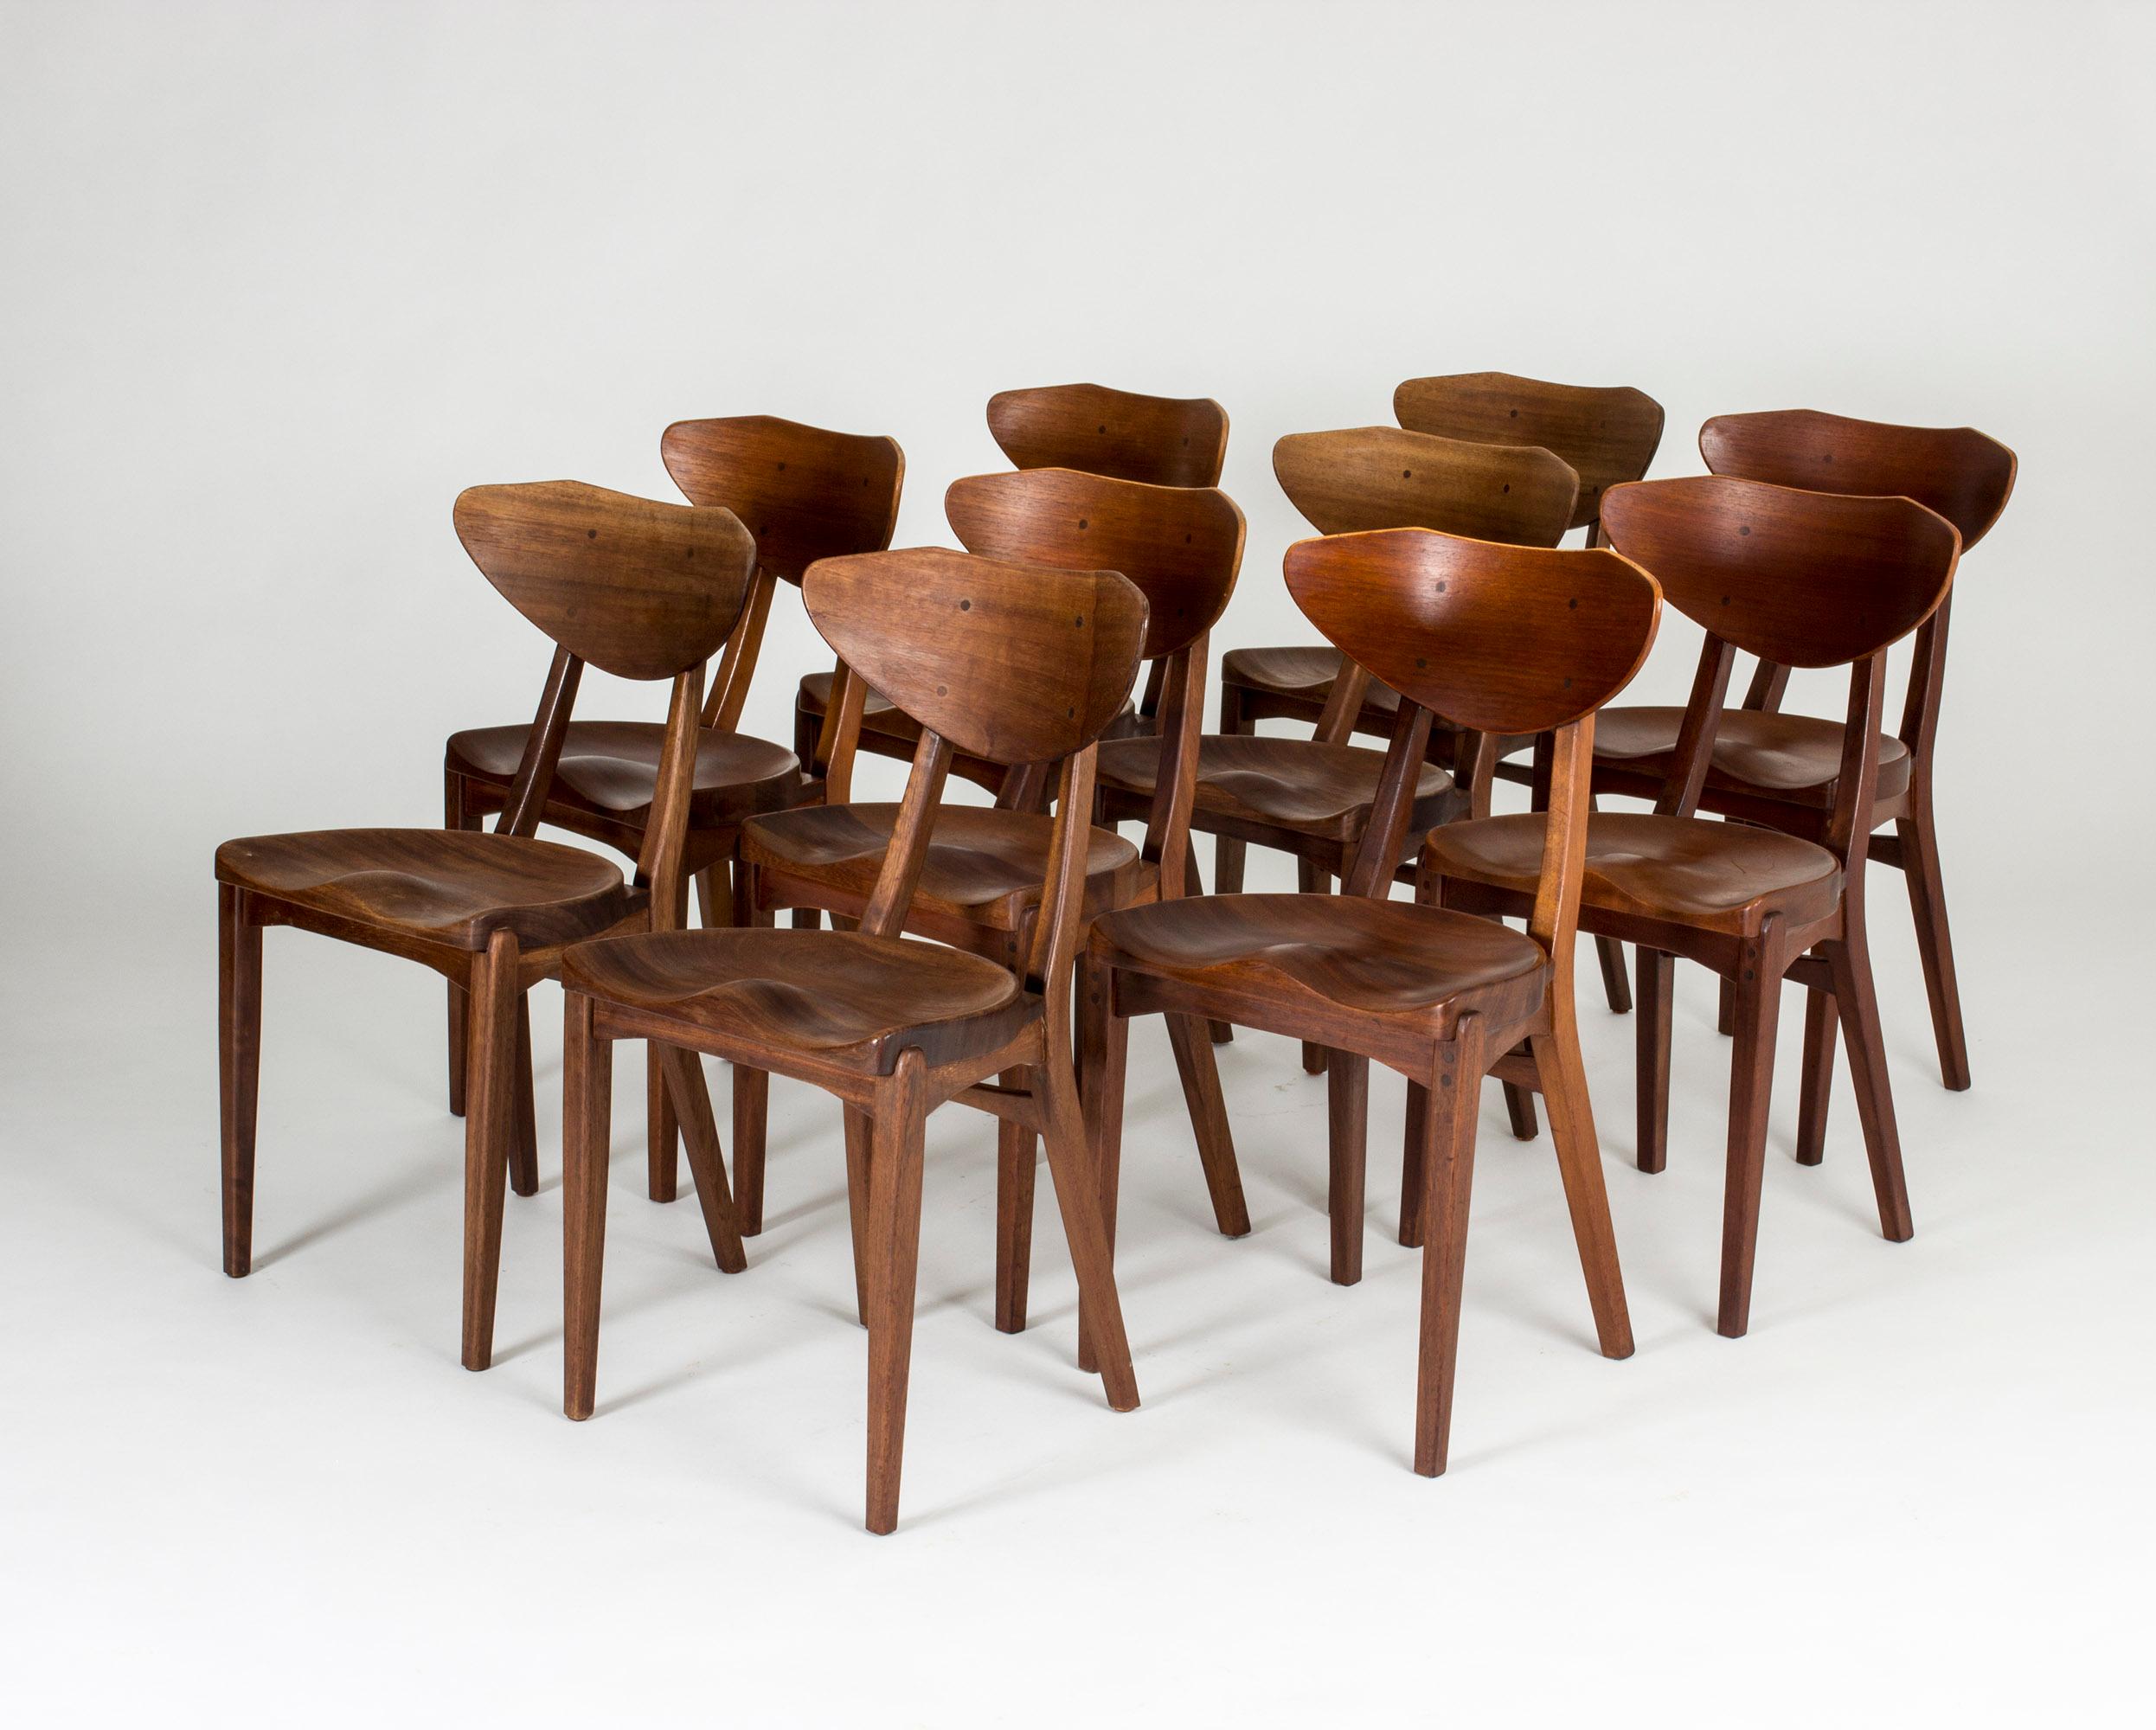 Set of ten stunning dining chairs by Richard Jensen and Kjærulff Rasmussen, made from teak. Solid teak seats inspired by traditional anatomical milk stools. Handles on the back och the backrests.